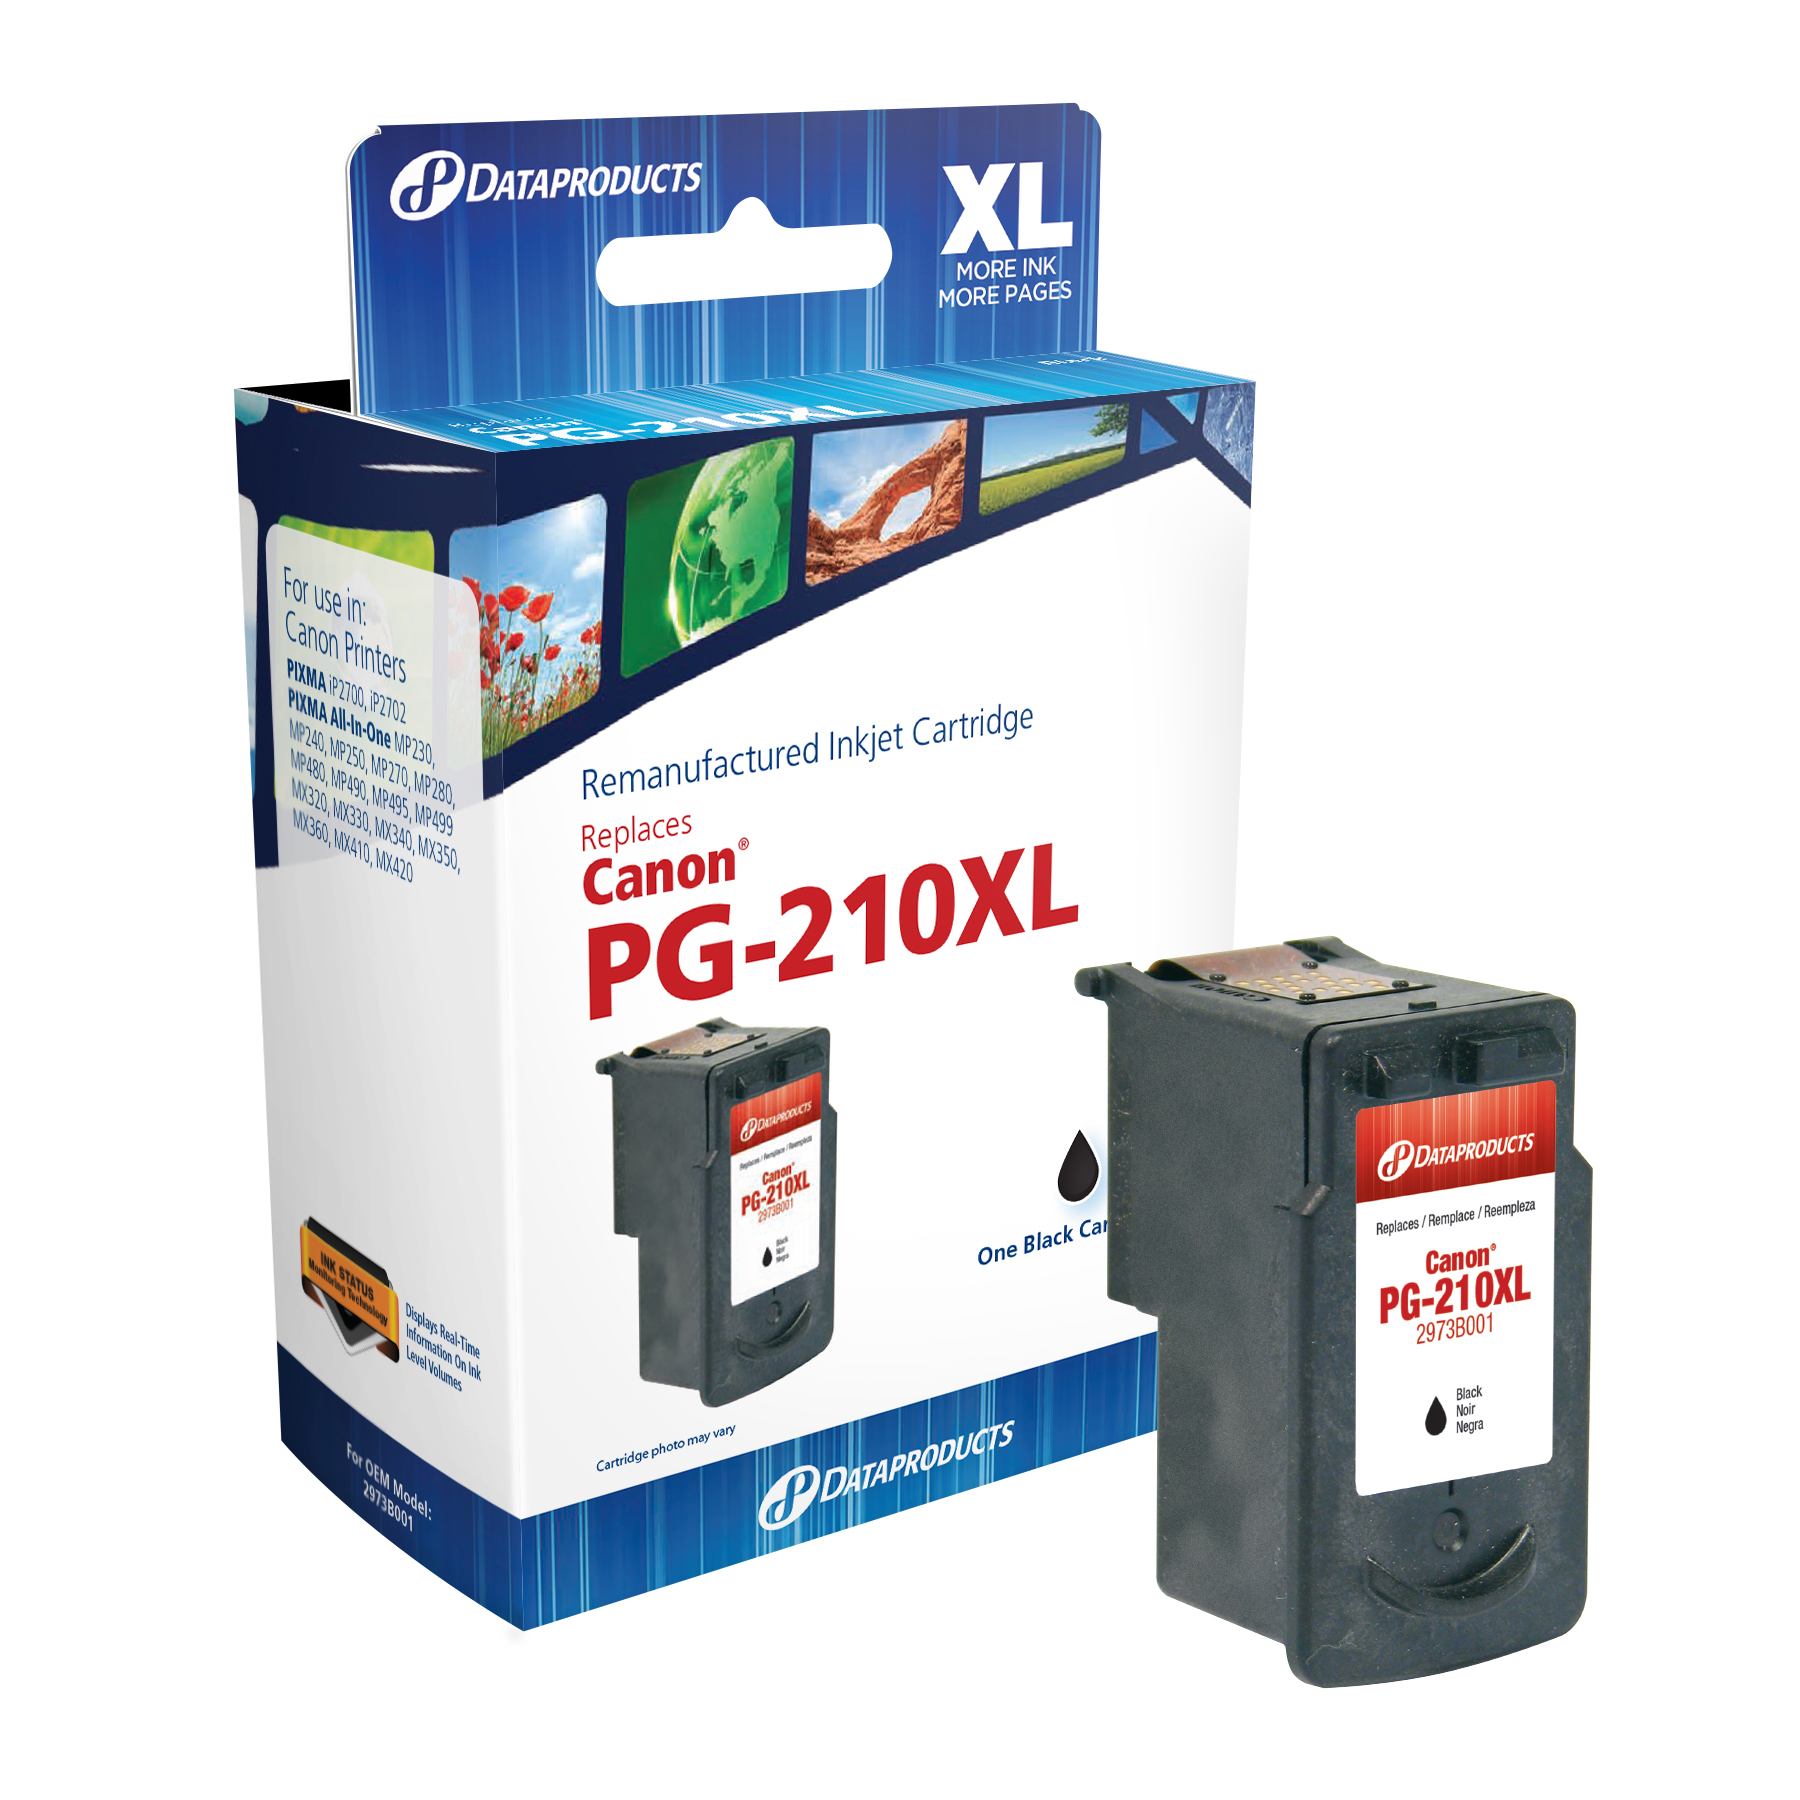 Dataproducts DPCPG210XL Remanufactured Inkjet Cartridge for Canon PG-210XL - High Capacity Black Ink